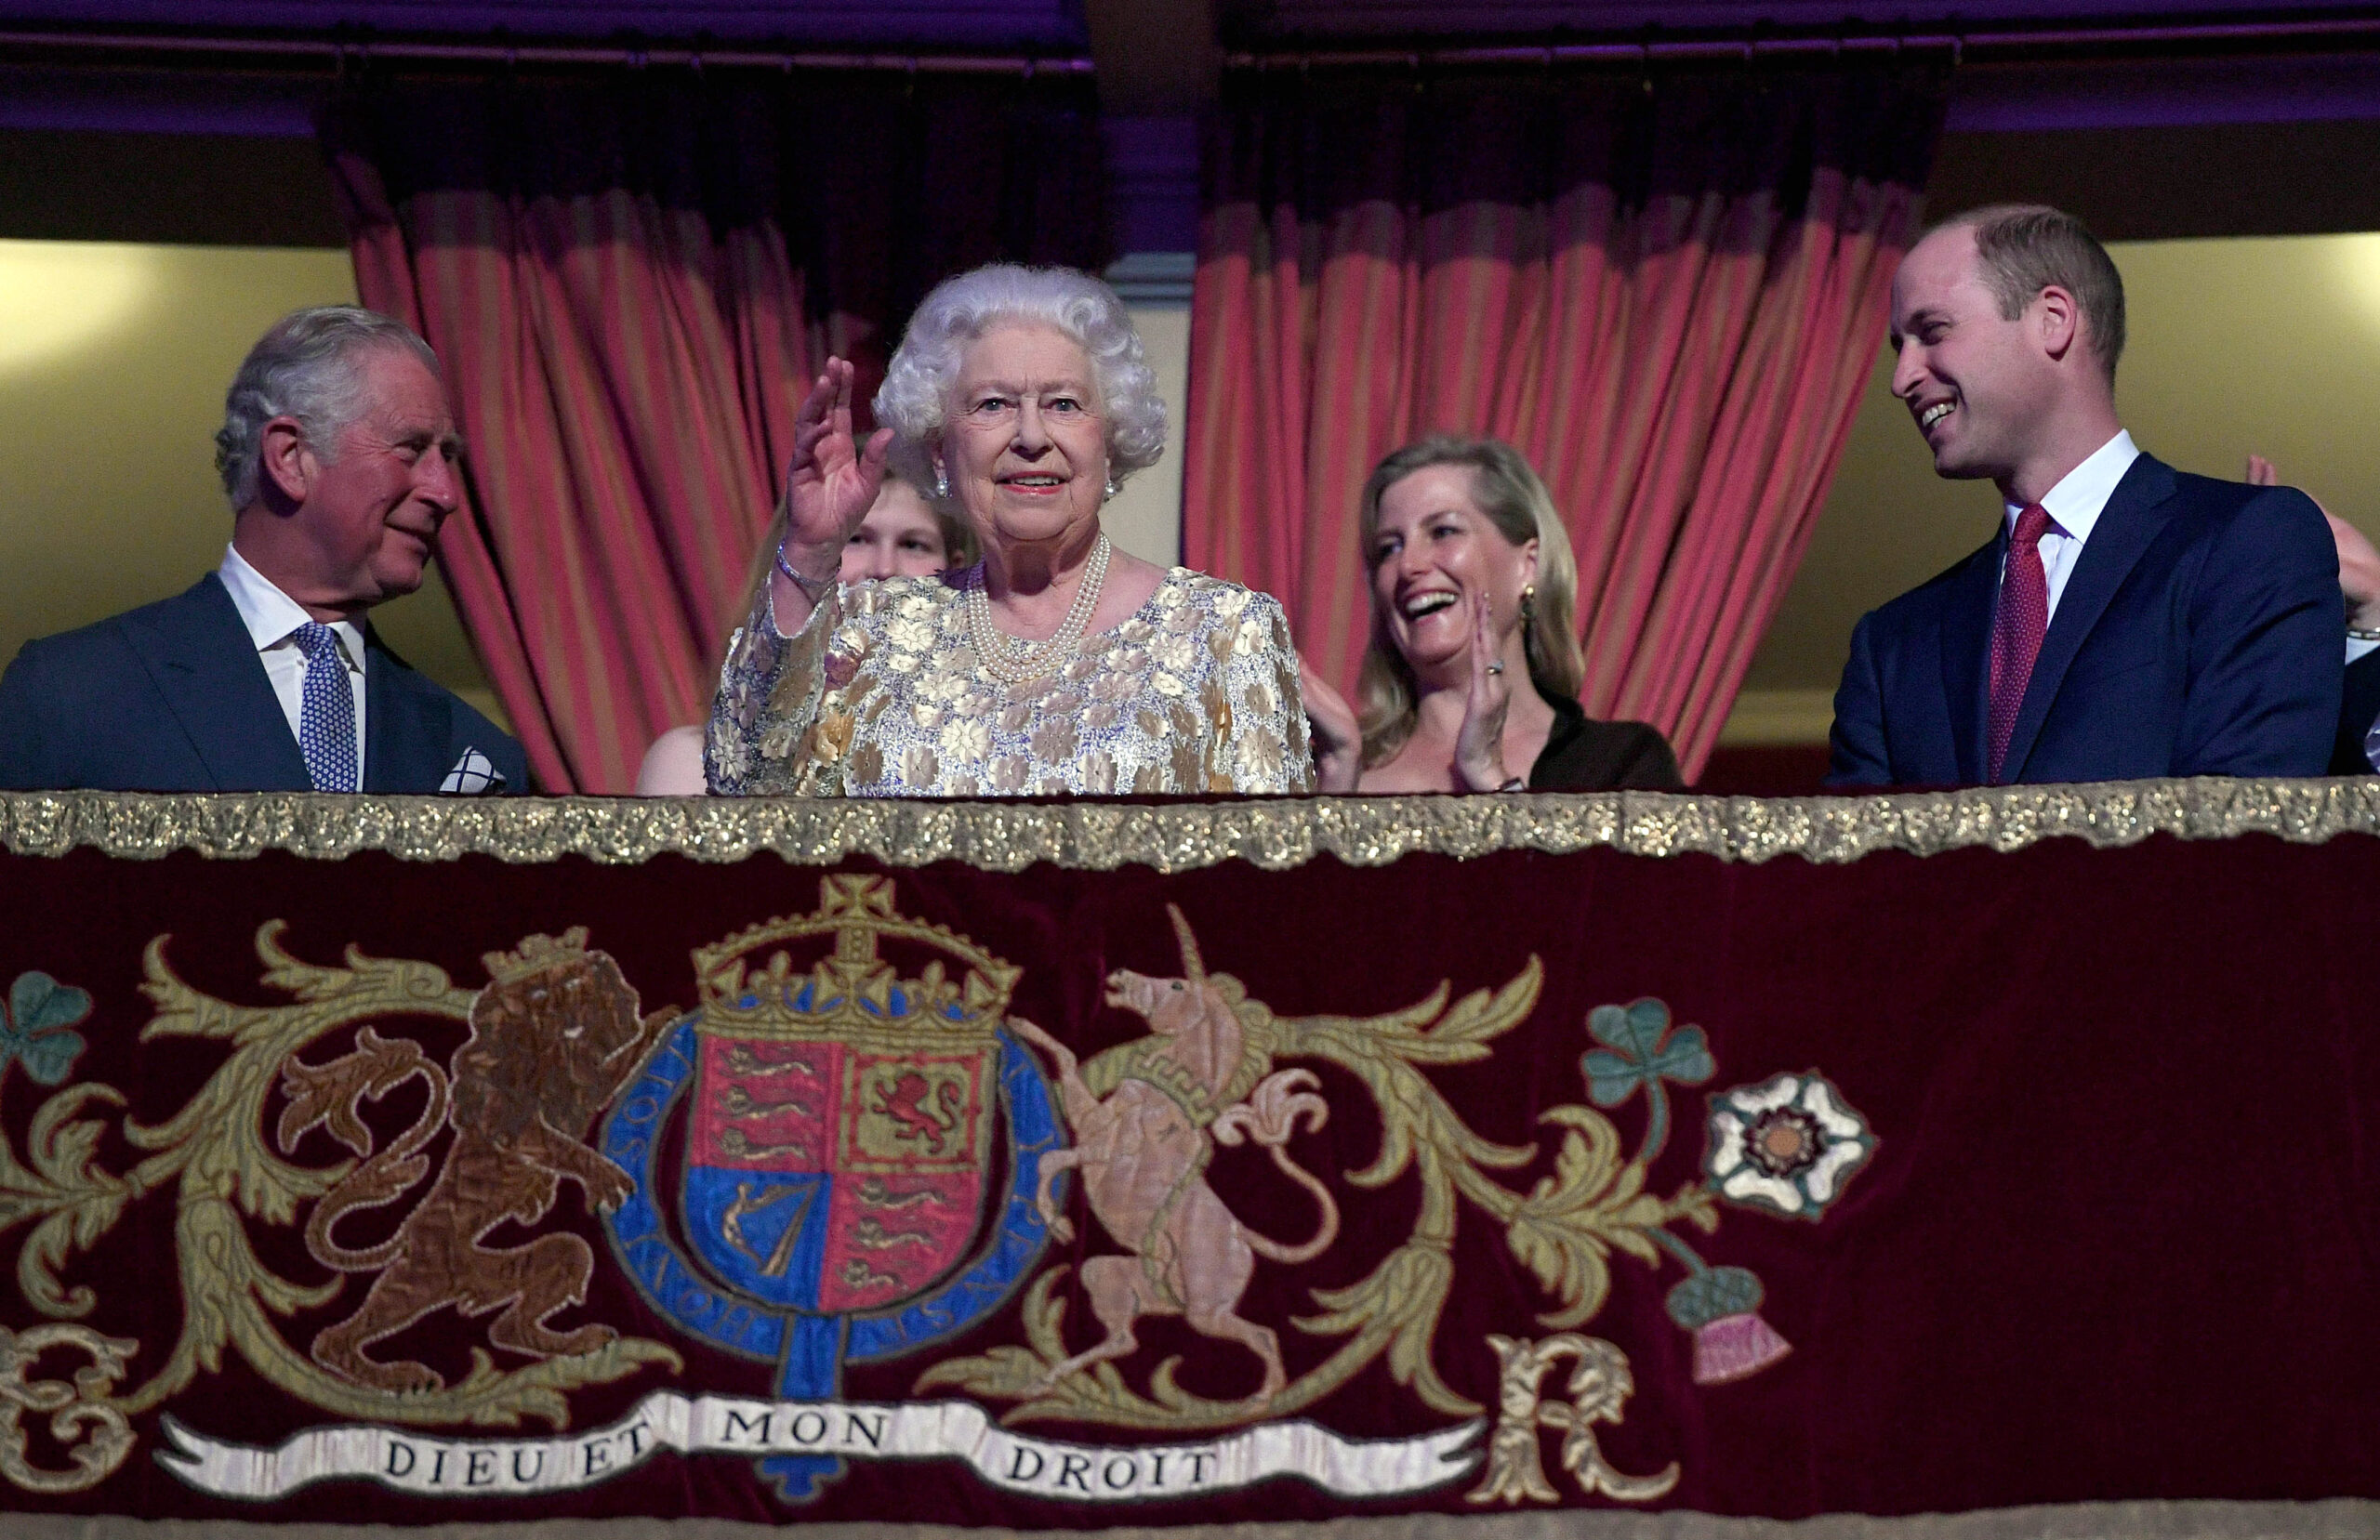 The Queen celebrates her 92nd birthday with a concert